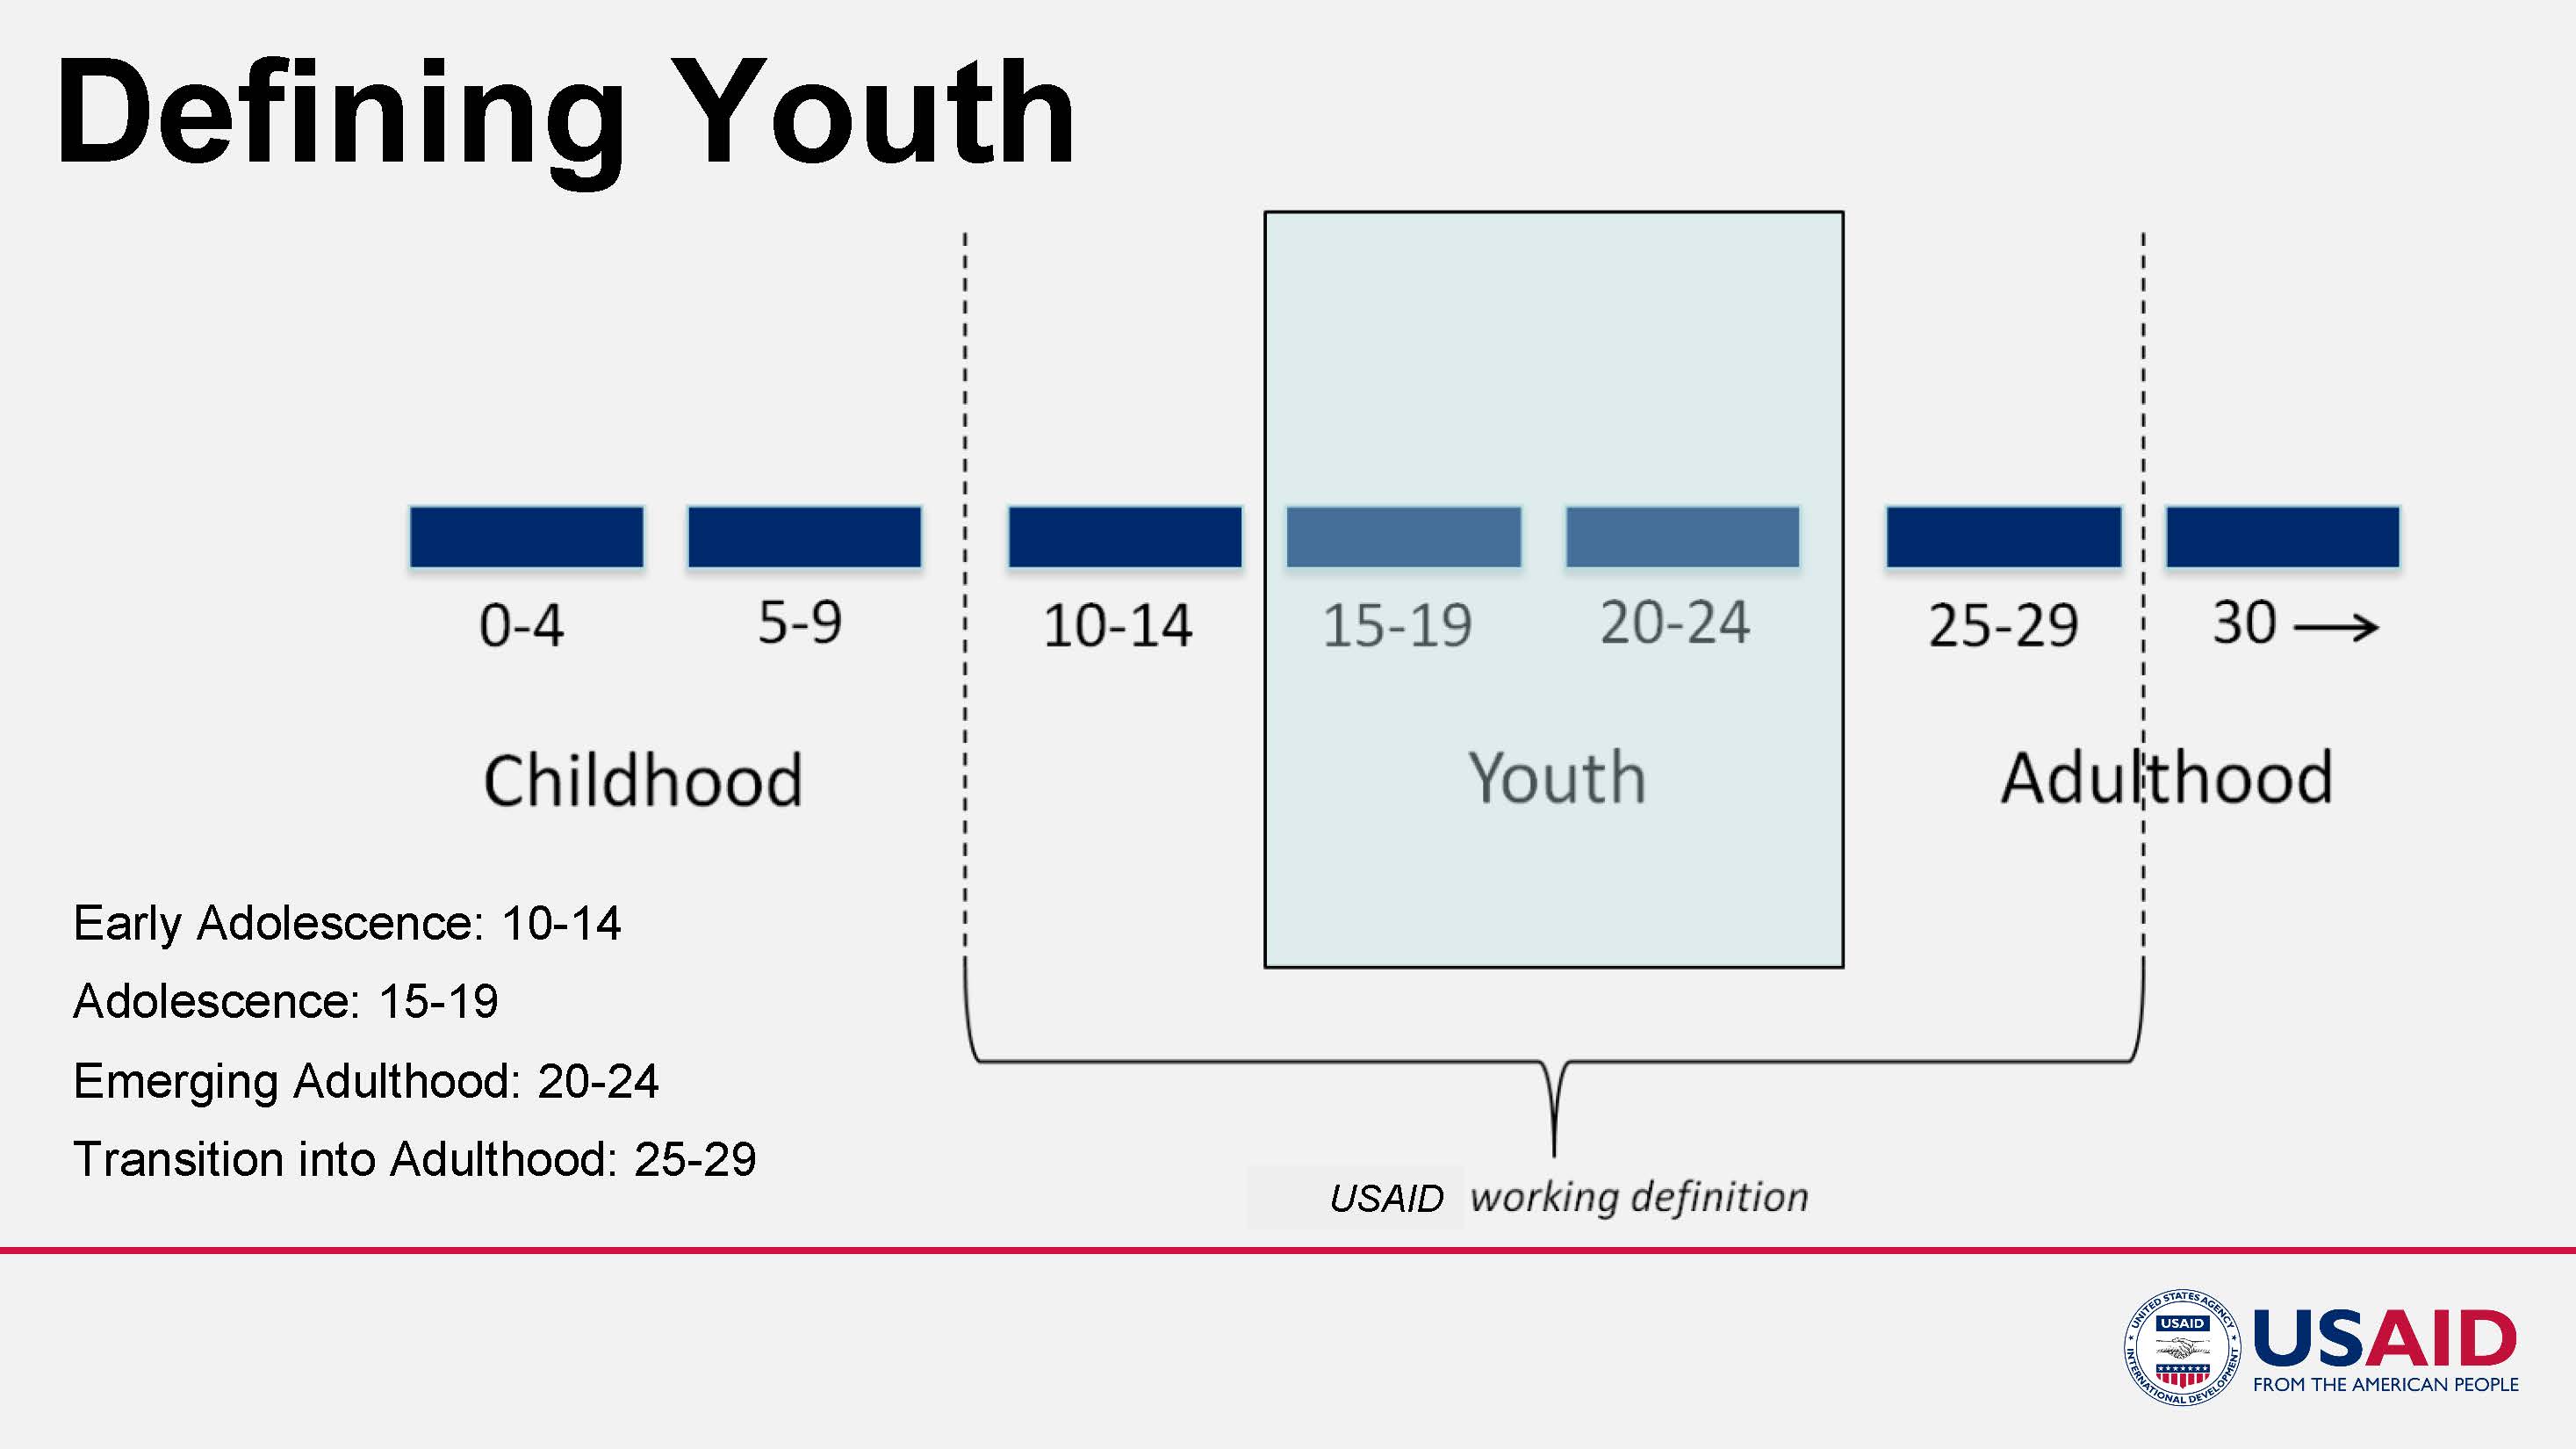 "Defining Youth" in 4-year phases, with childhood 0-4 and 5-9, early adolescence 10-14, adolescence 15-19, emerging adulthood 20-24, transition into adulthood 25-29. A bracket shows that USAID includes ages 10-29 in its definition of youth.